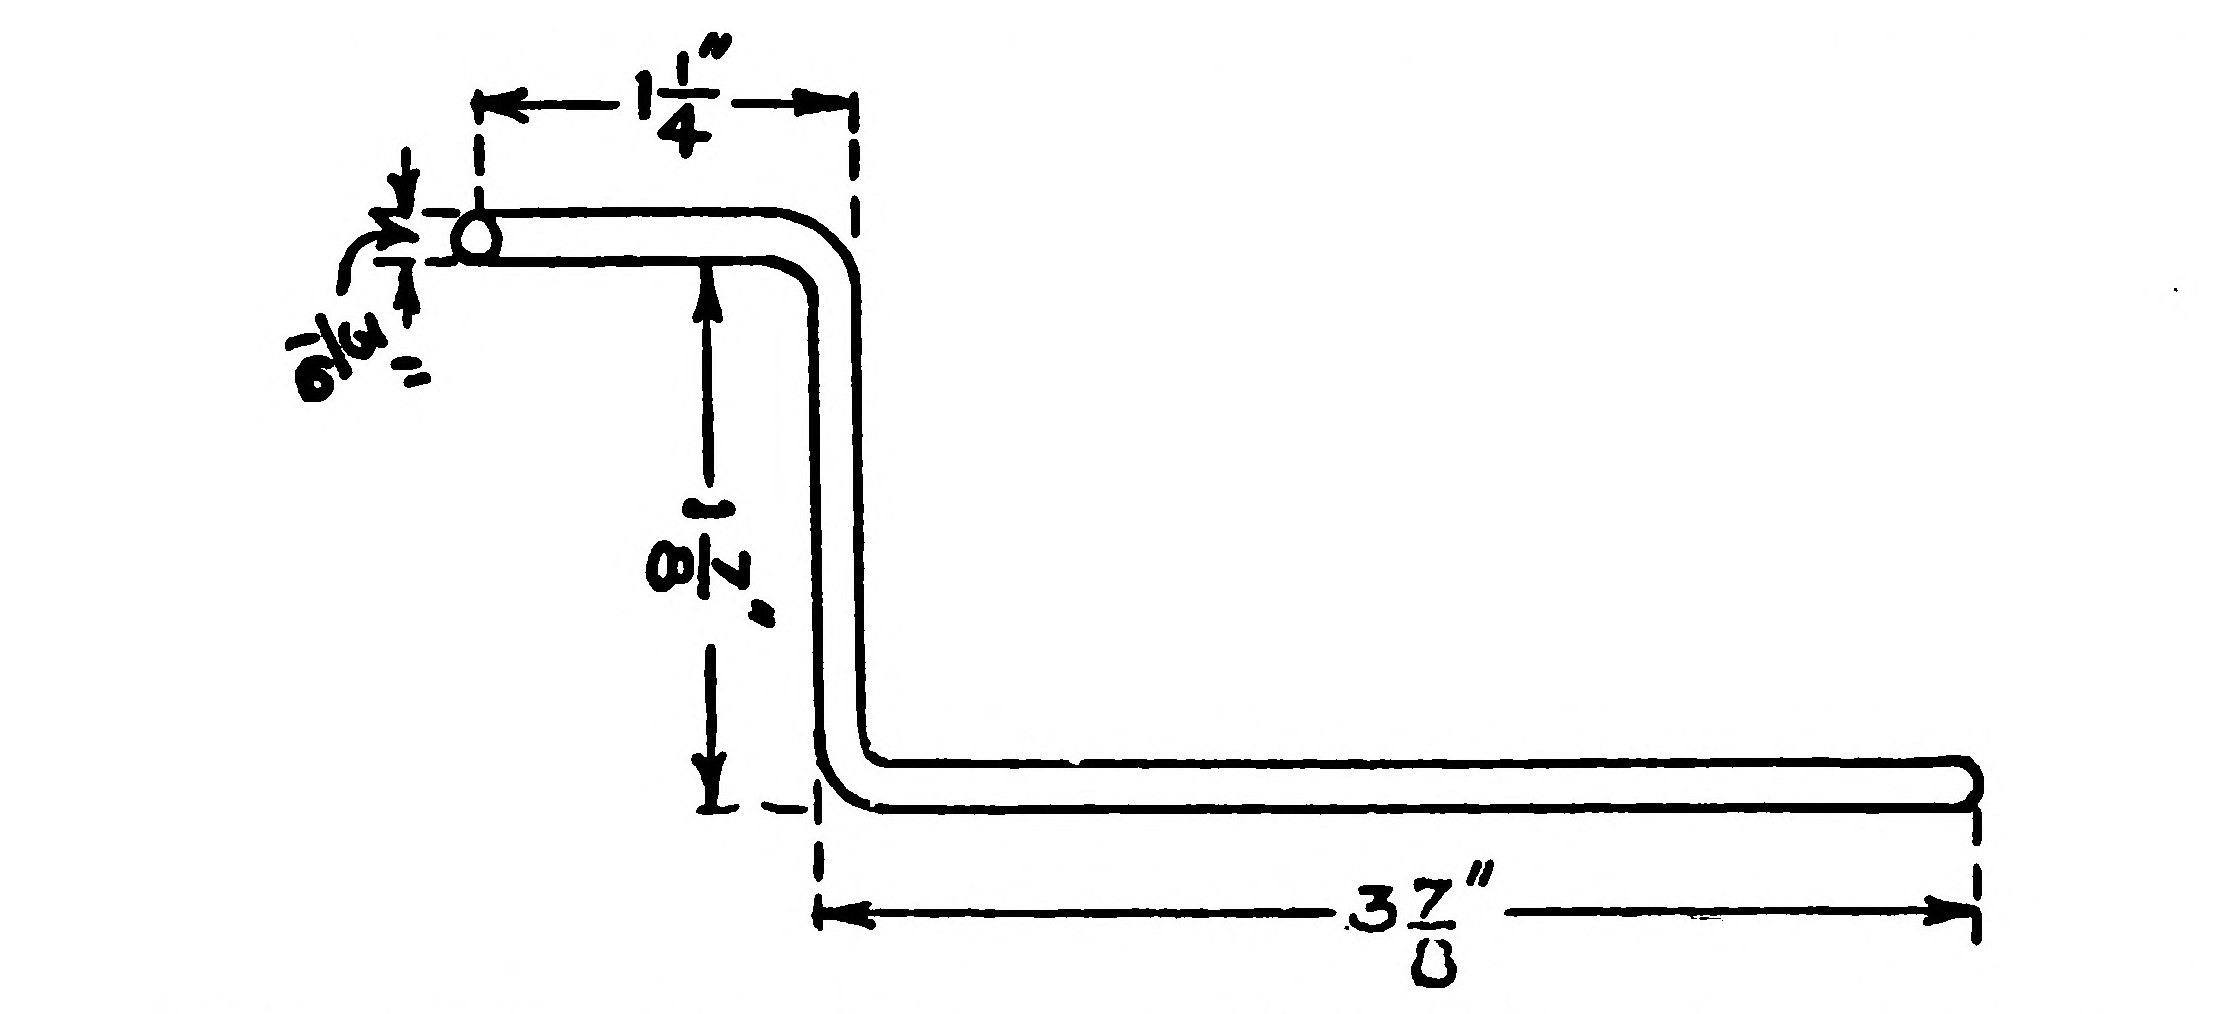 FIG. 9.—The Crank is bent out of a piece of 3/16 rod, 7 inches long, into the shape shown.